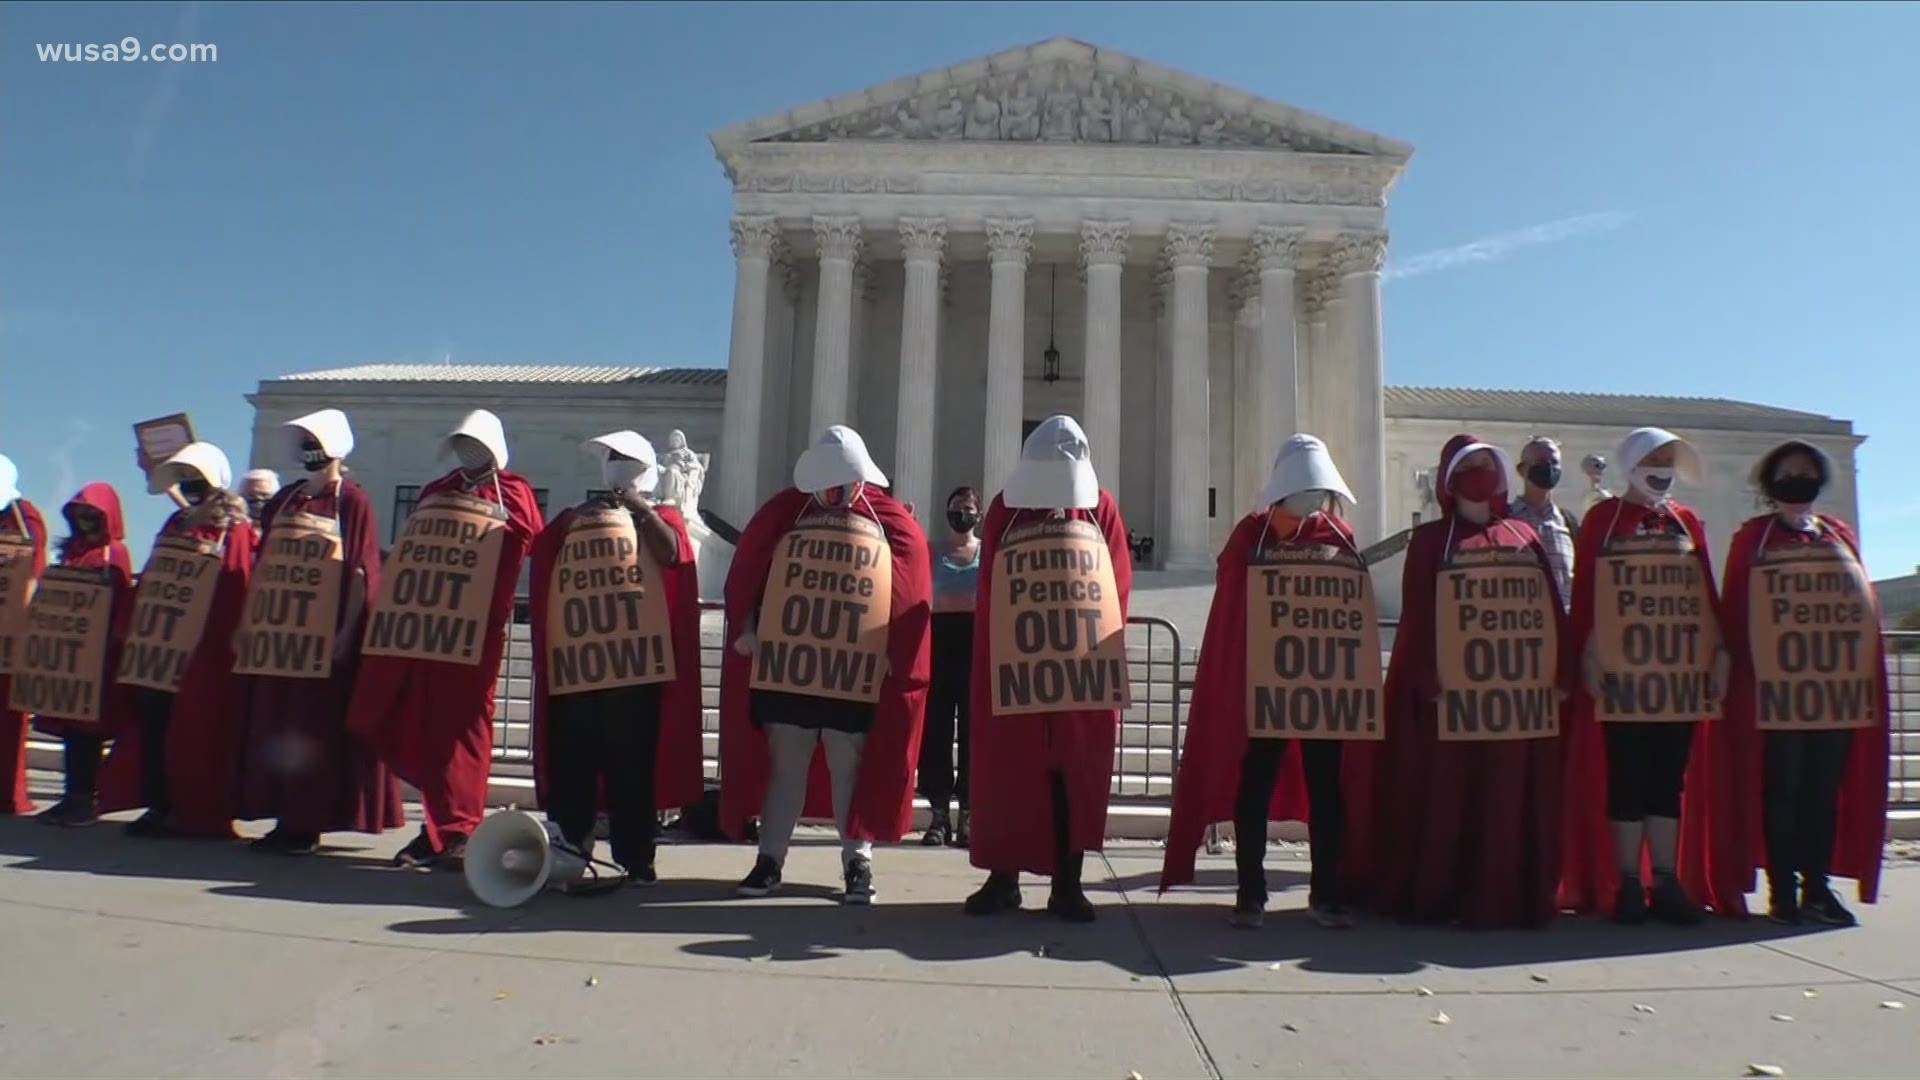 D.C. protesters dressed as 'handmaids' rally on the last day of Amy Coney Barrett's Supreme Court Justice nomination hearings.